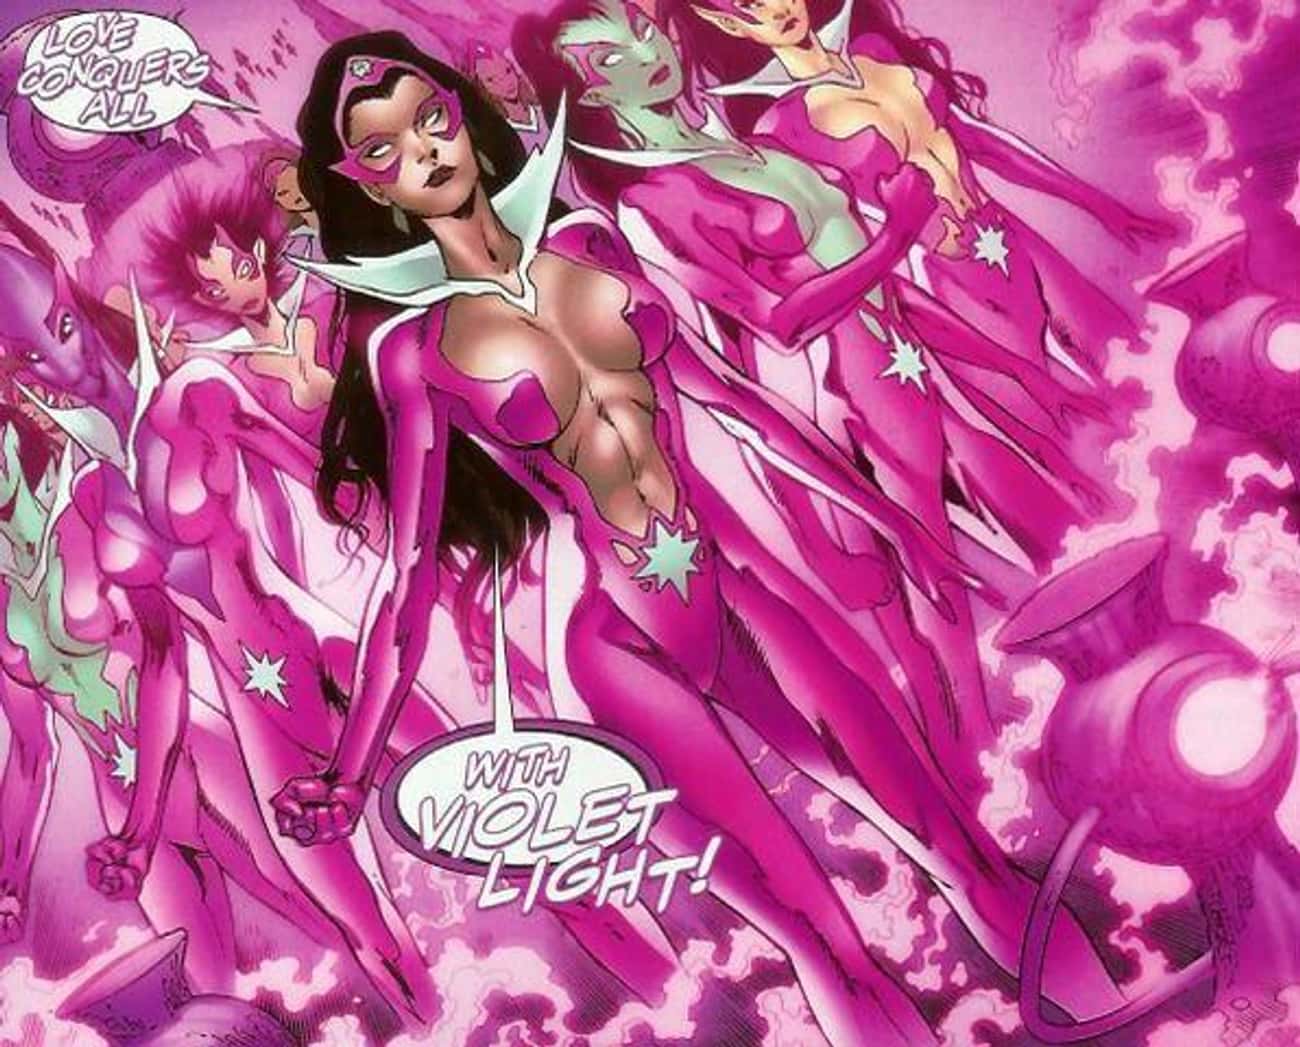 The Star Sapphire Ring Needs To Save All The Love